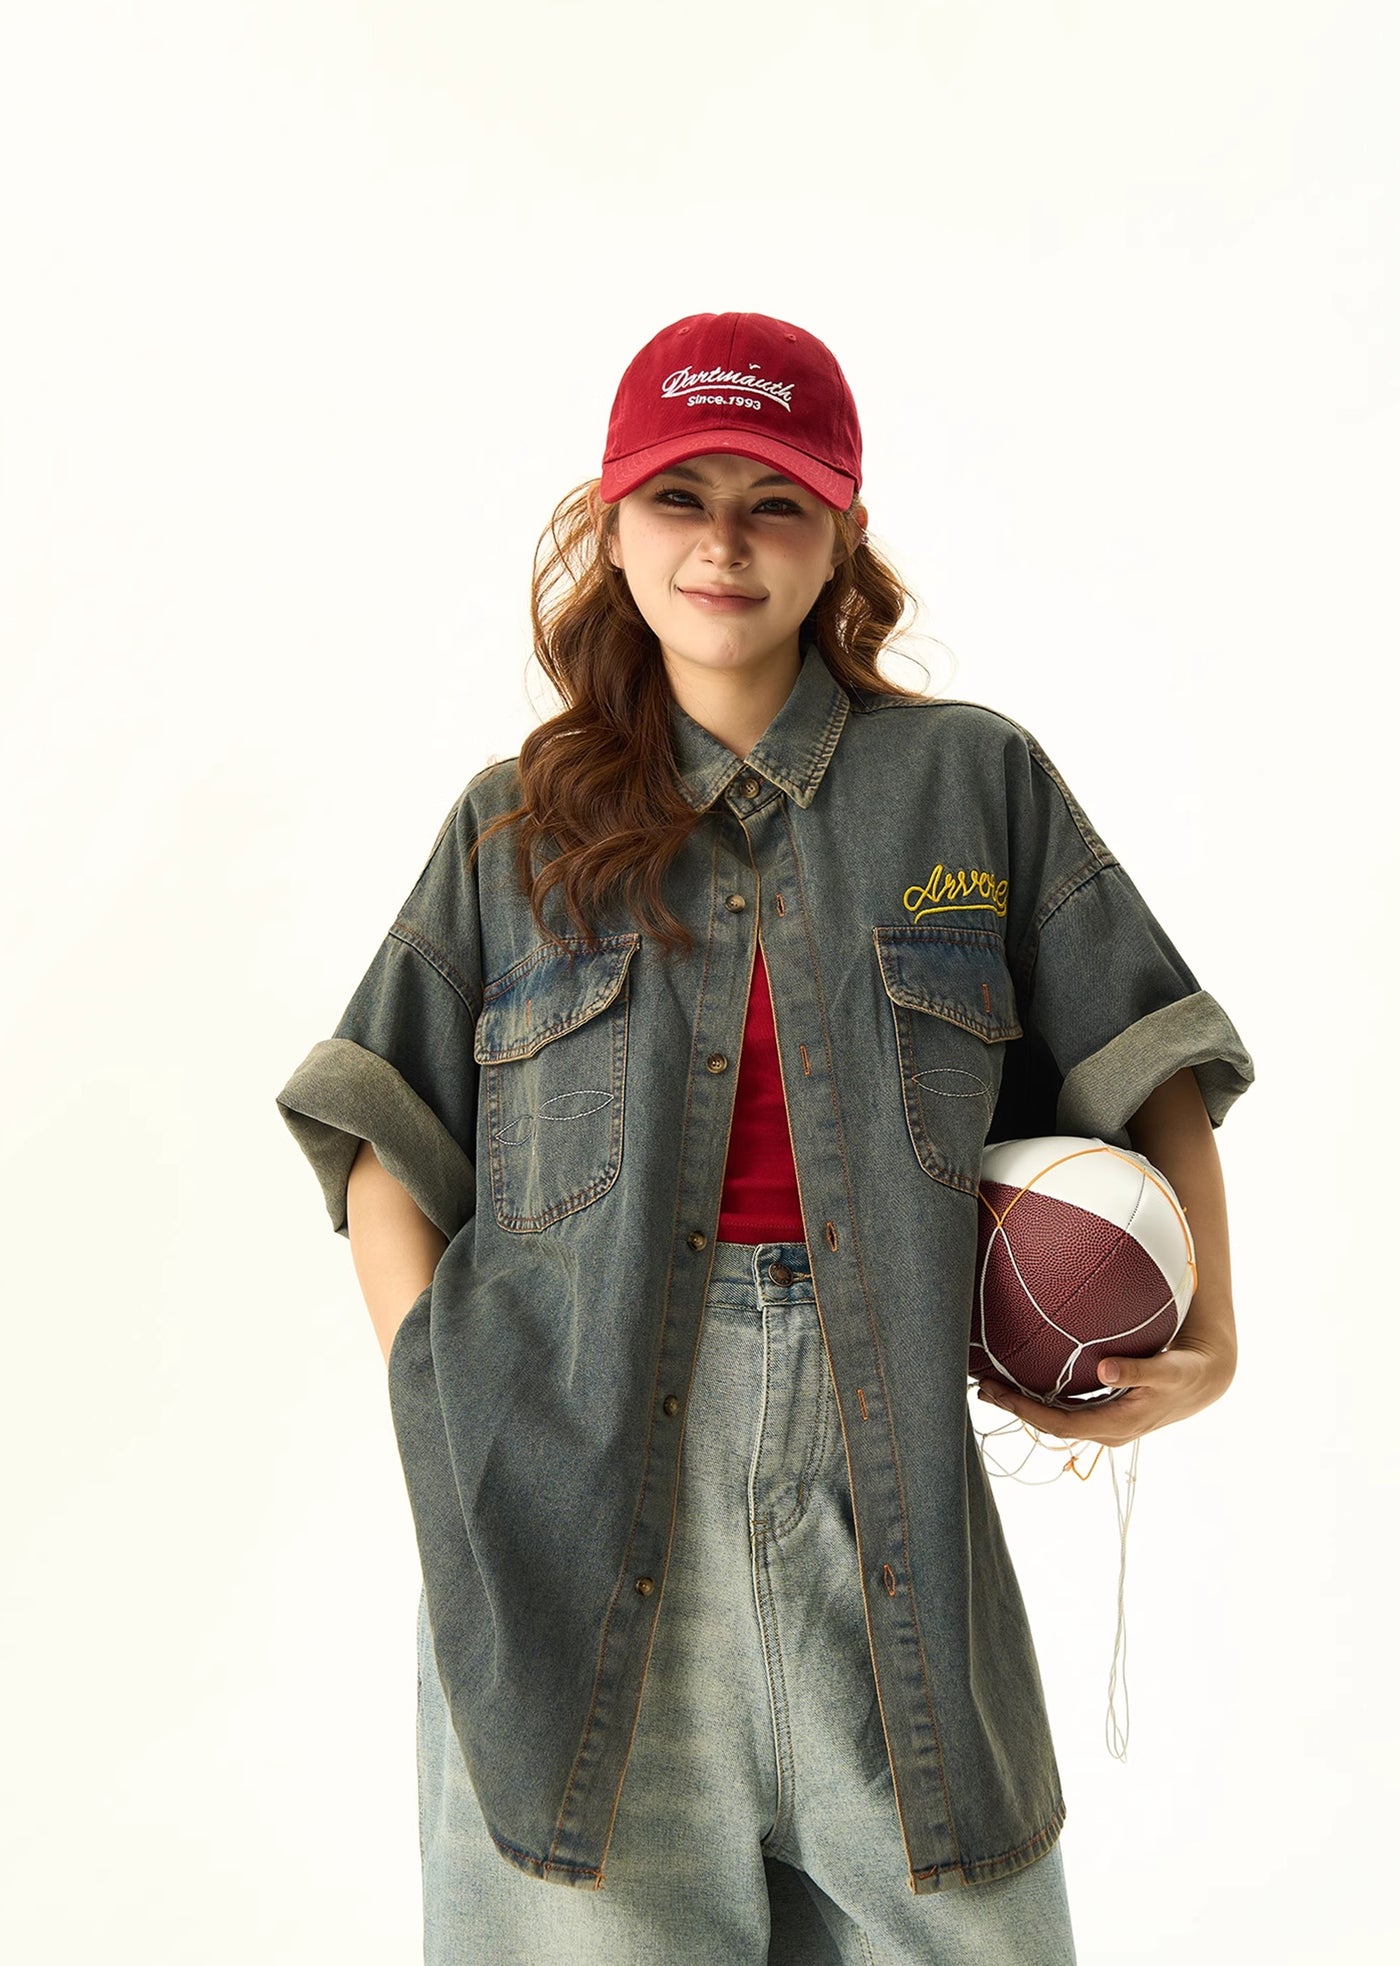 [H GANG X] Dull vintage color over silhouette denim shirt HX0035